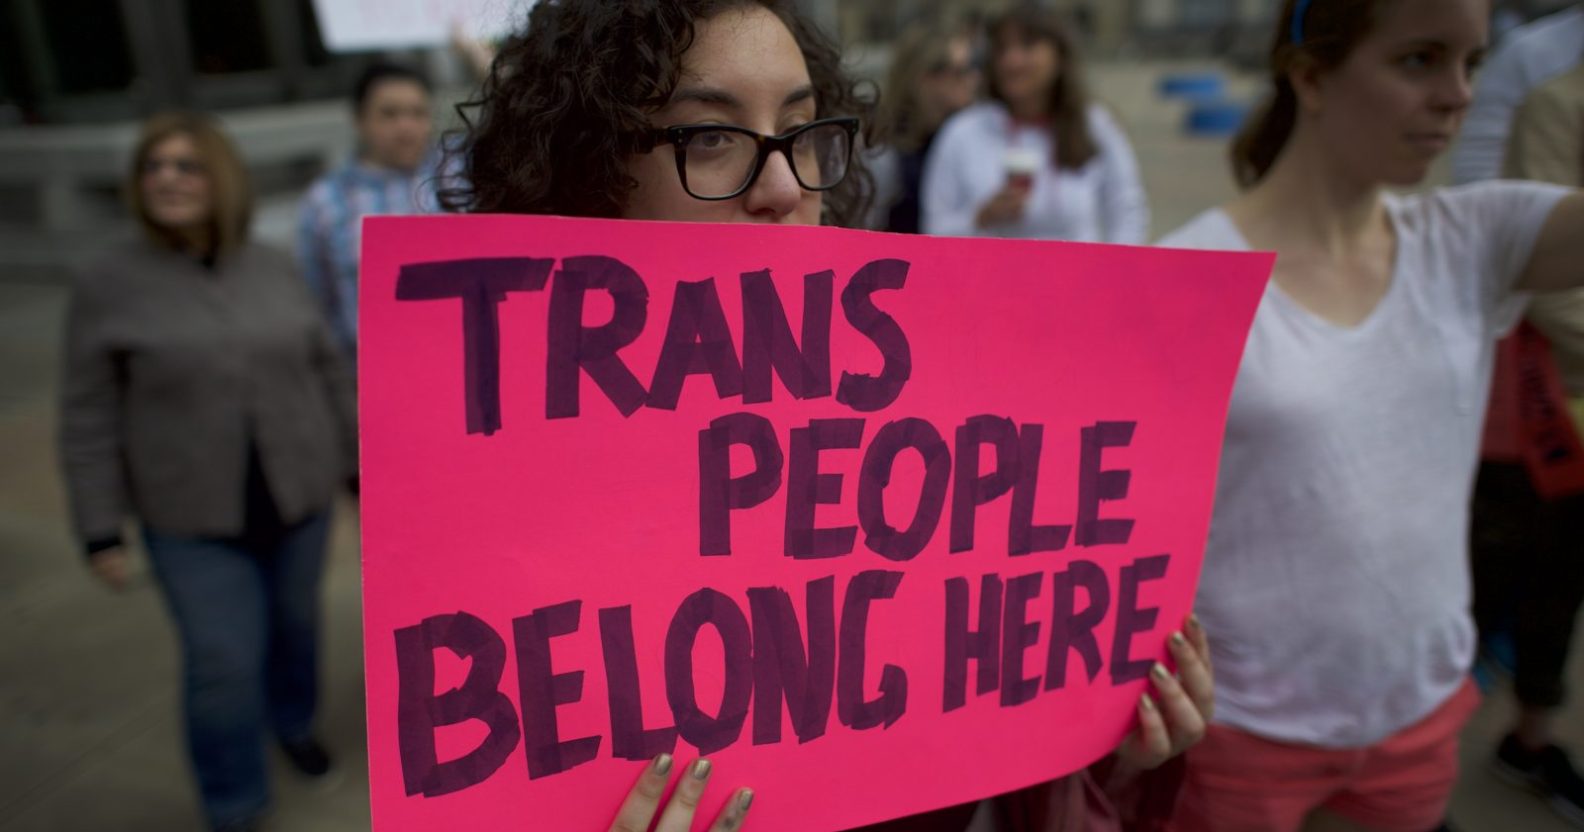 Tranny T Bag - Shemale: Why you should never use this anti-trans slur